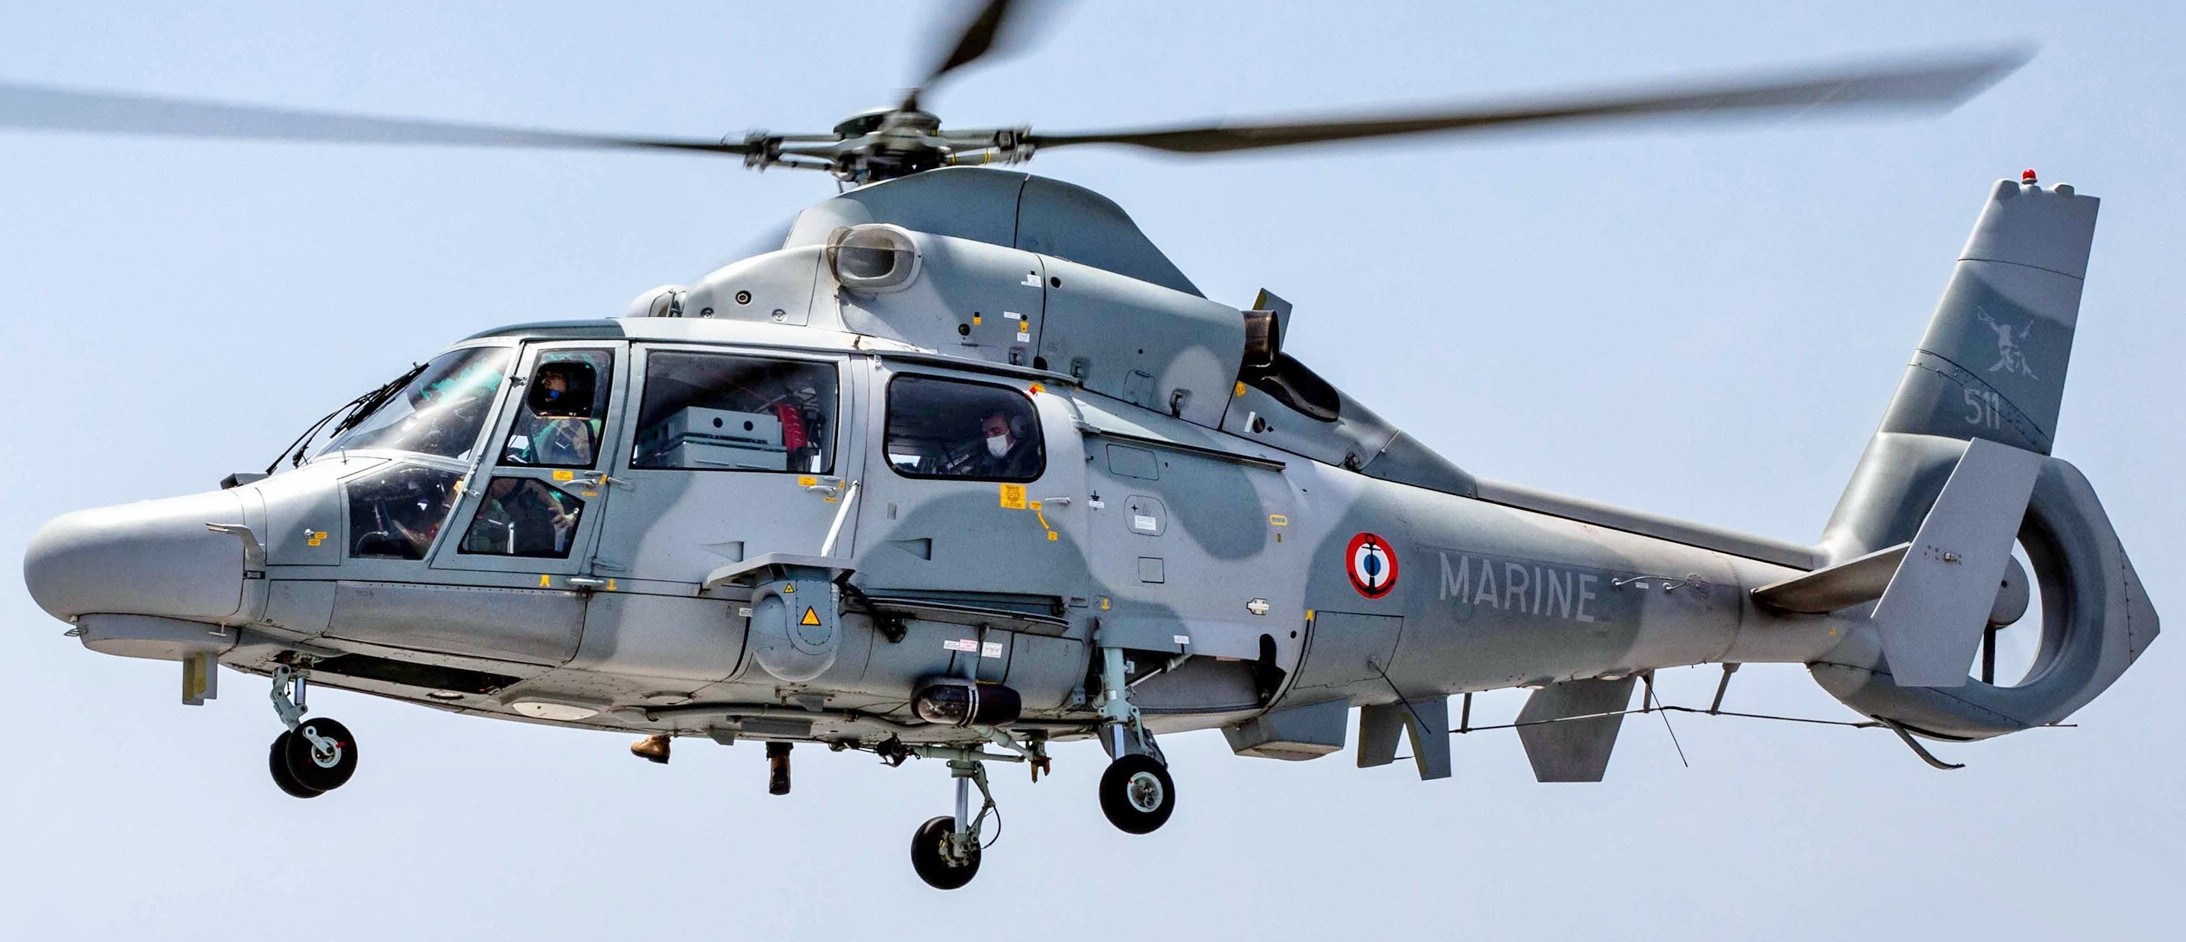 as-565sa panther helicopter french navy marine nationale flottille 36f ban hyeres toulon 511 44